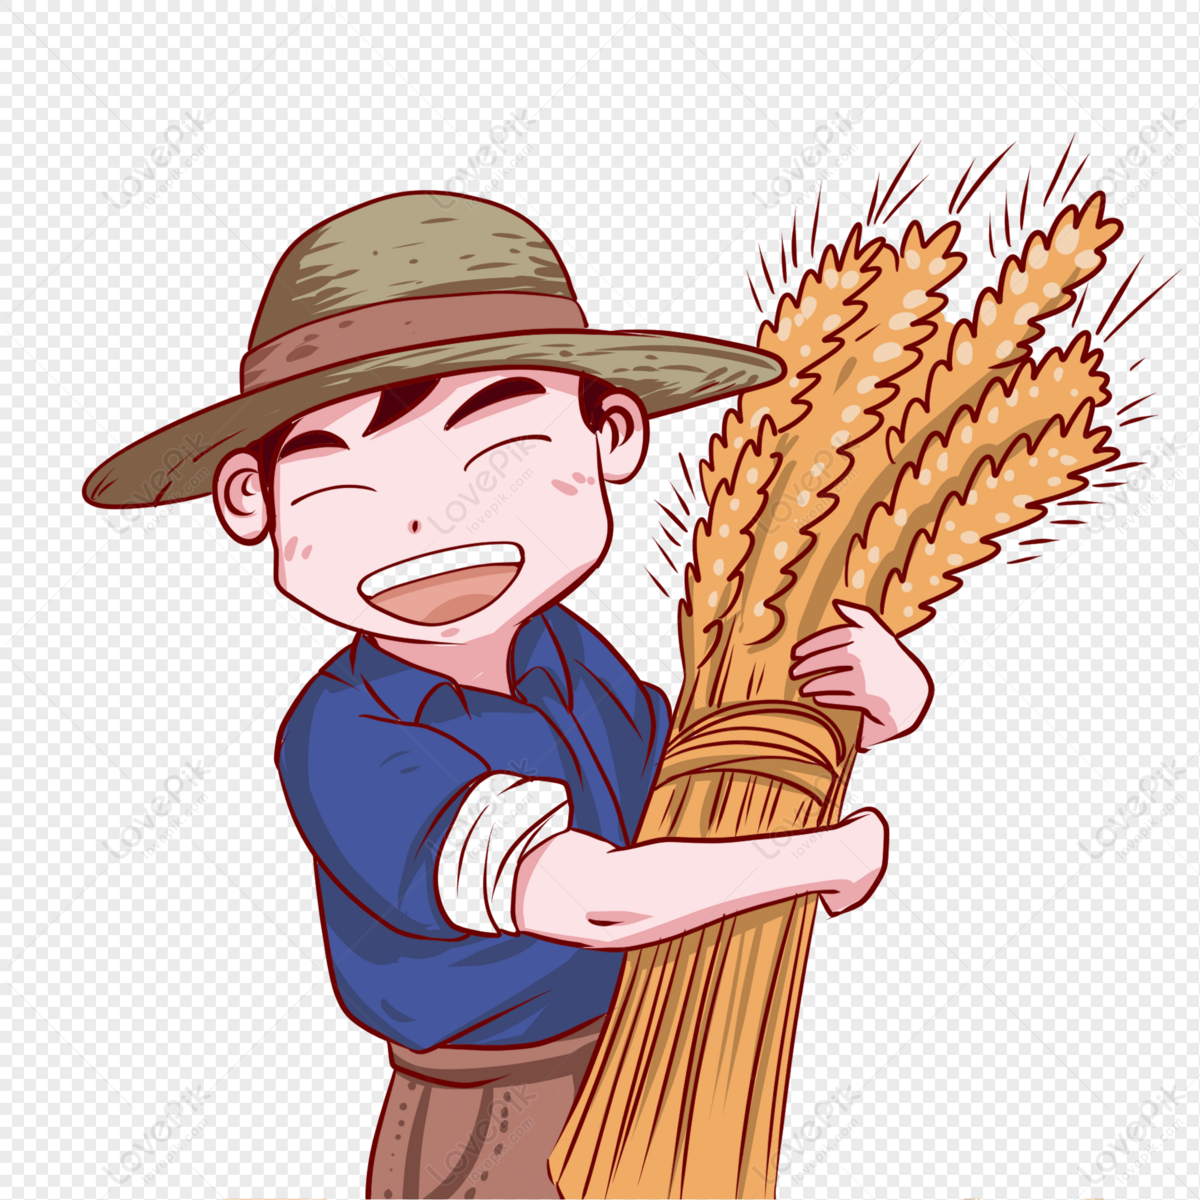 Cartoon Farmer PNG Transparent Background And Clipart Image For Free  Download - Lovepik | 401405610